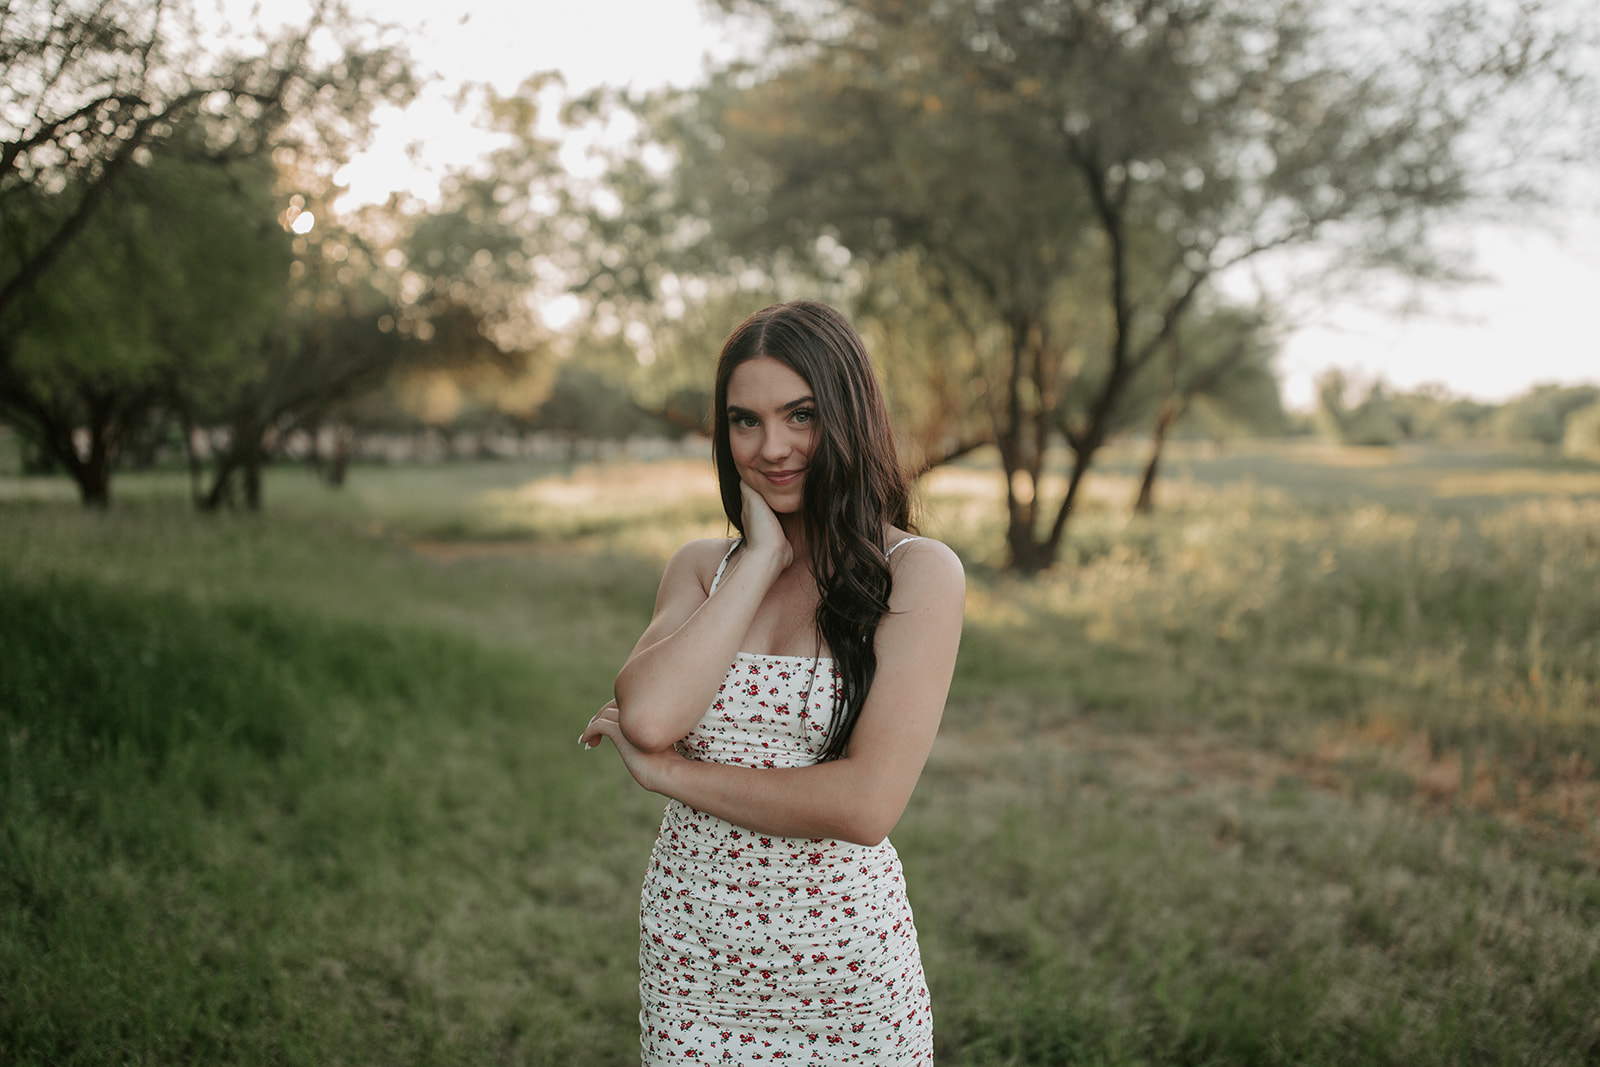 Arizona Spring High School Senior Session | Sophie Taylor | DMHS 2020 by Isabella Lusk Photography. This blog post includes senior portrait outfit and posing ideas. Book your Arizona senior portrait and browse the blog for more inspiration #photography #seniorsession #portrait #outfitinspiration #Arizonaphotographer